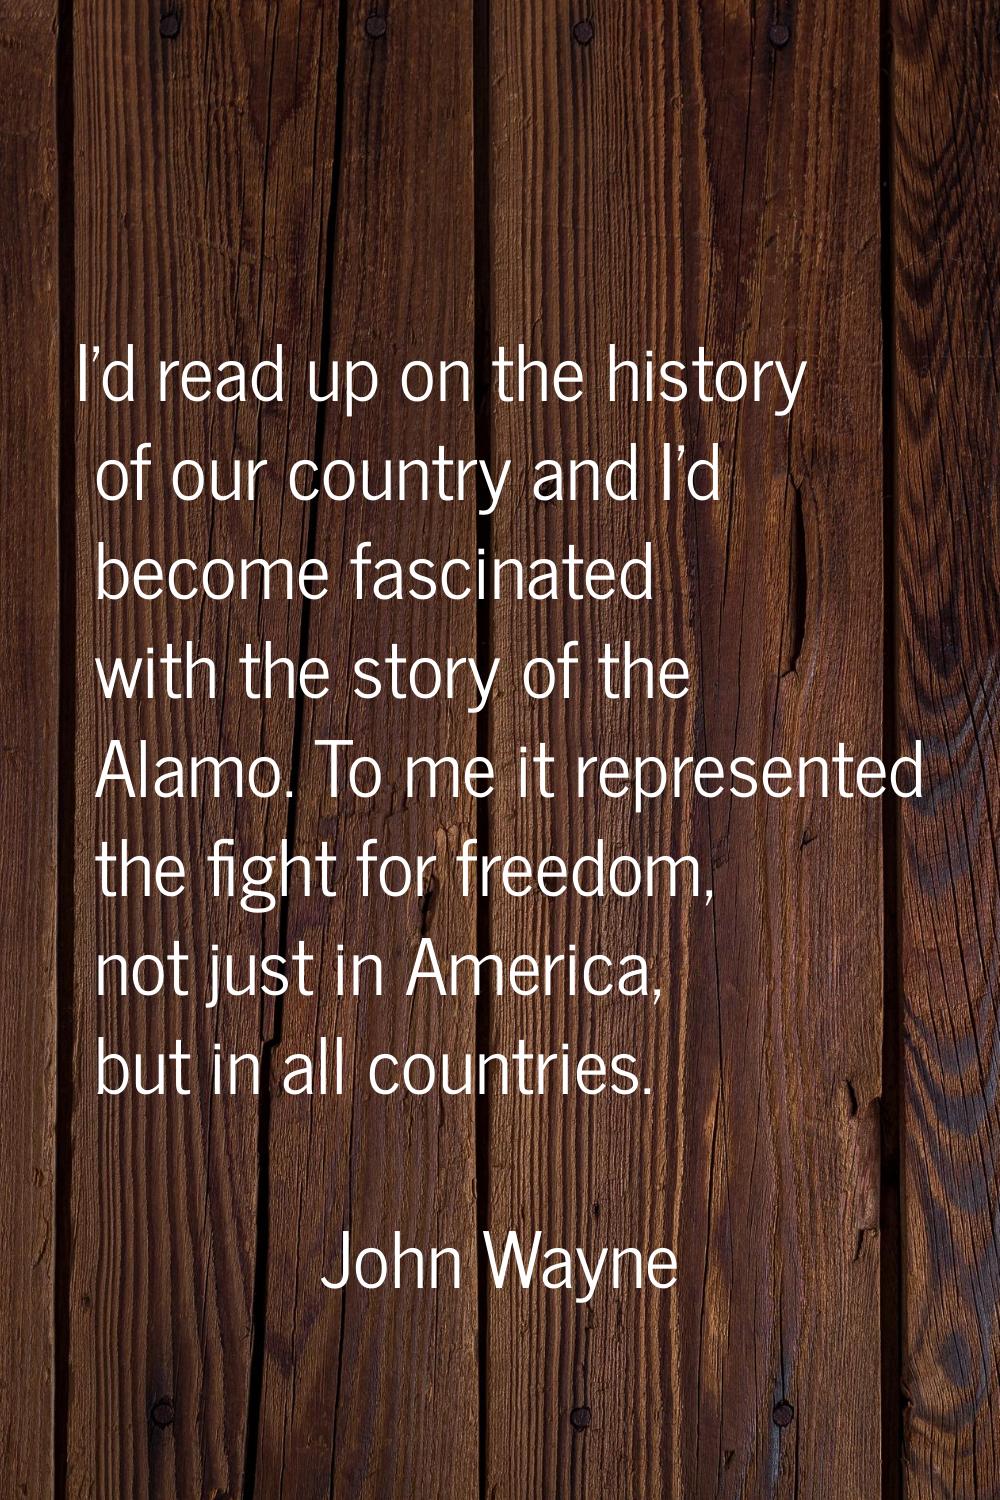 I'd read up on the history of our country and I'd become fascinated with the story of the Alamo. To